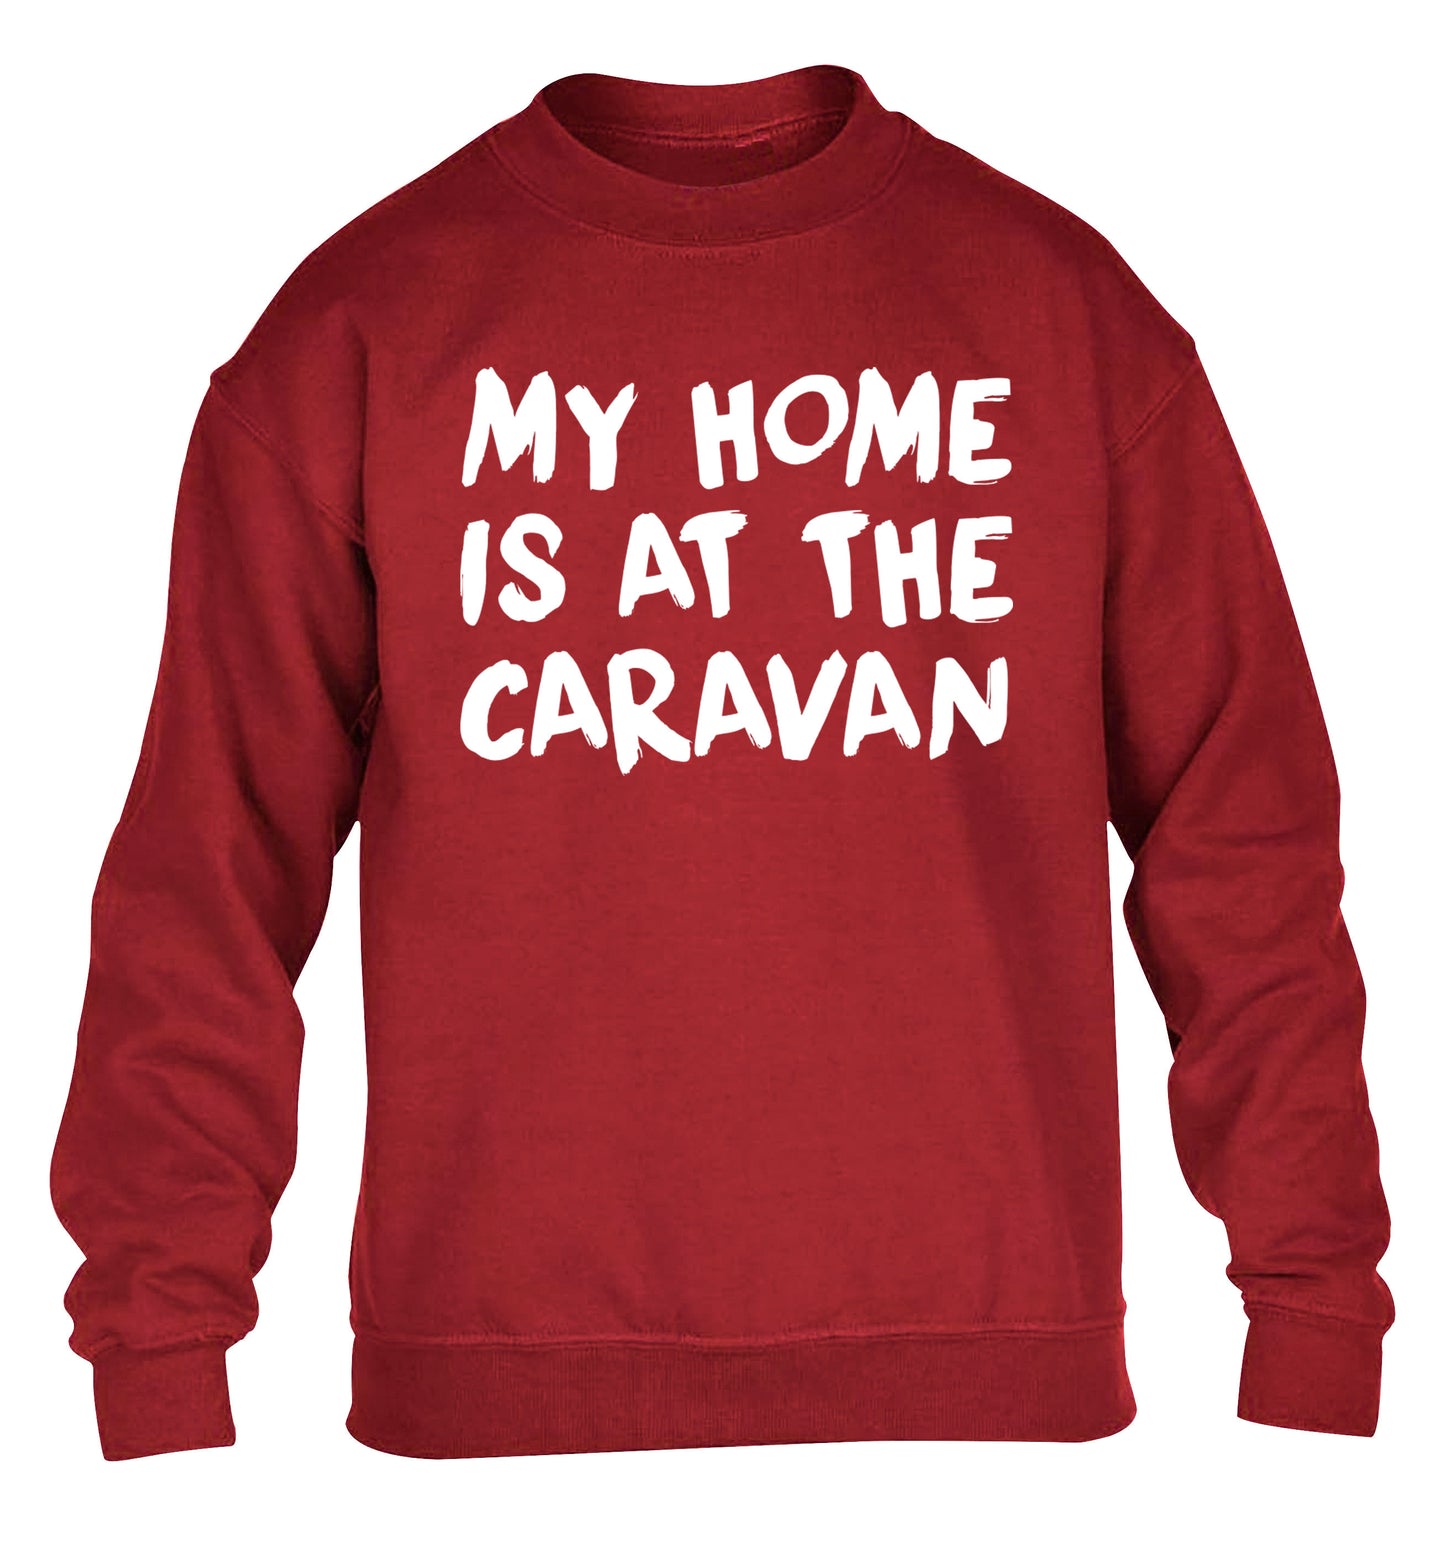 My home is at the caravan children's grey sweater 12-14 Years